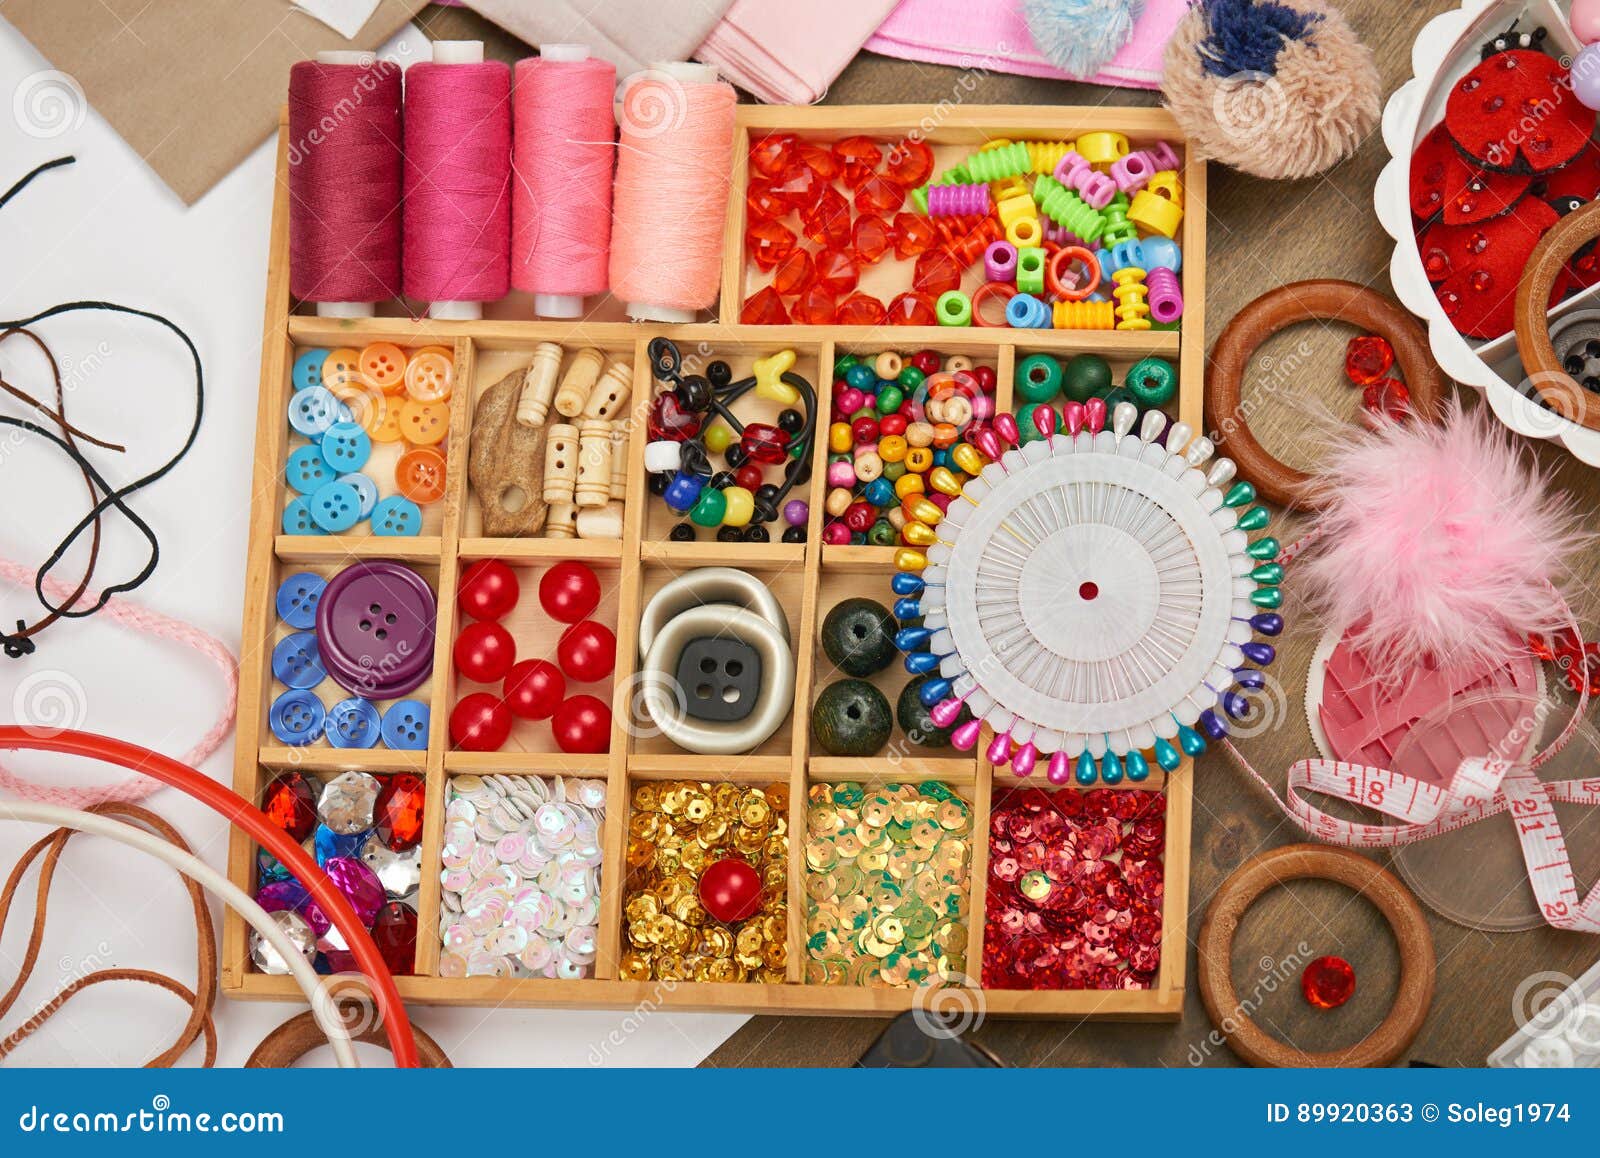 set of accessories and jewelry to embroidery, haberdashery, sewing